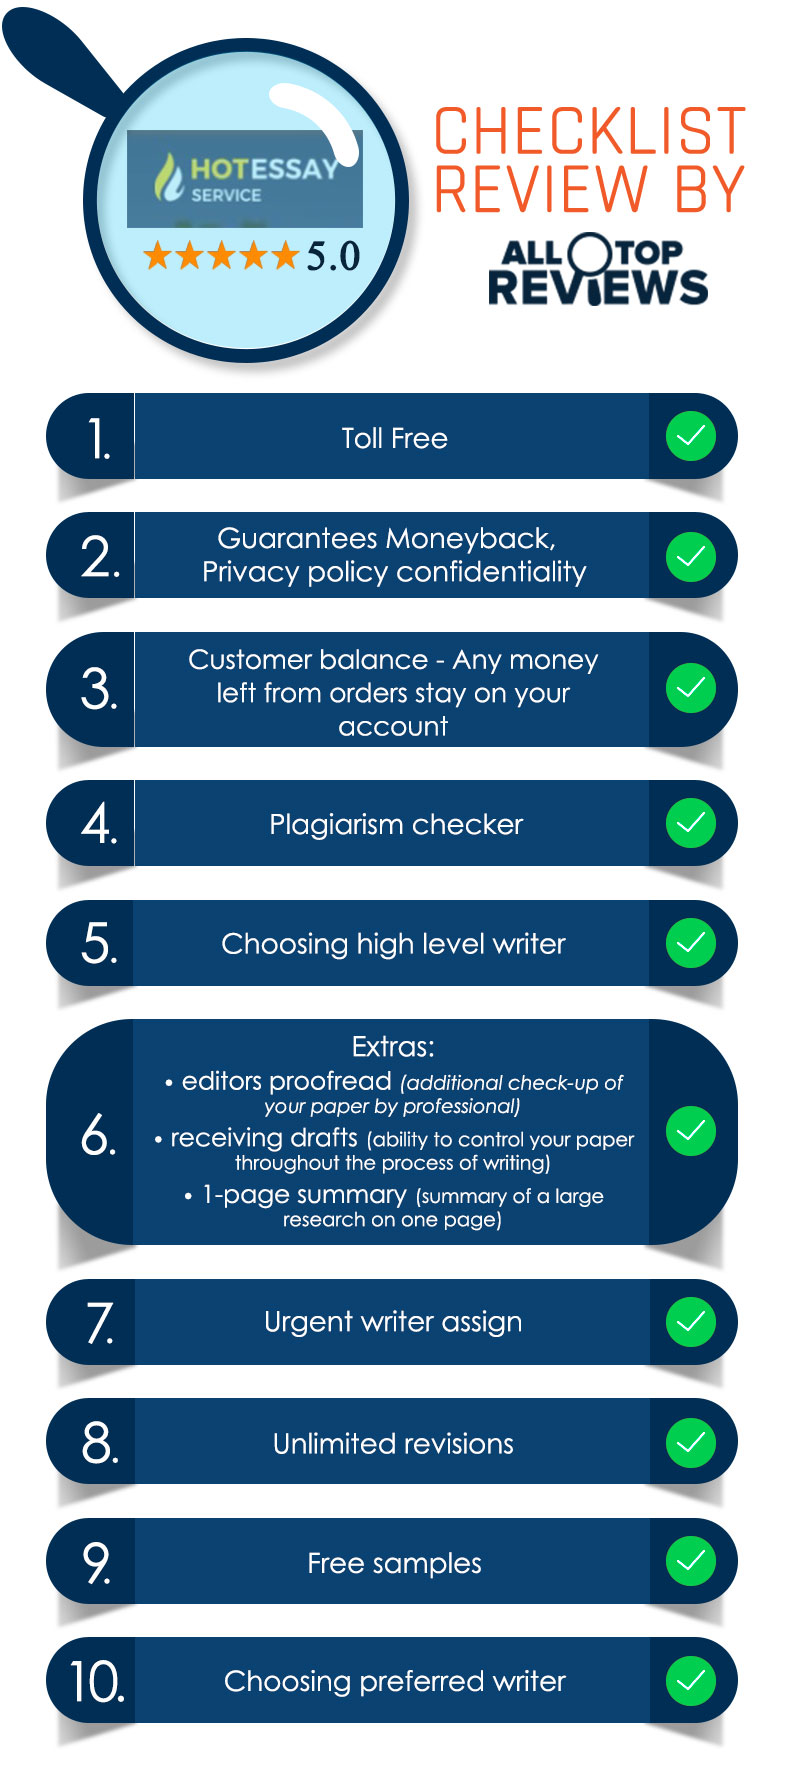 HotEssayService Review by All Top Reviews infographic